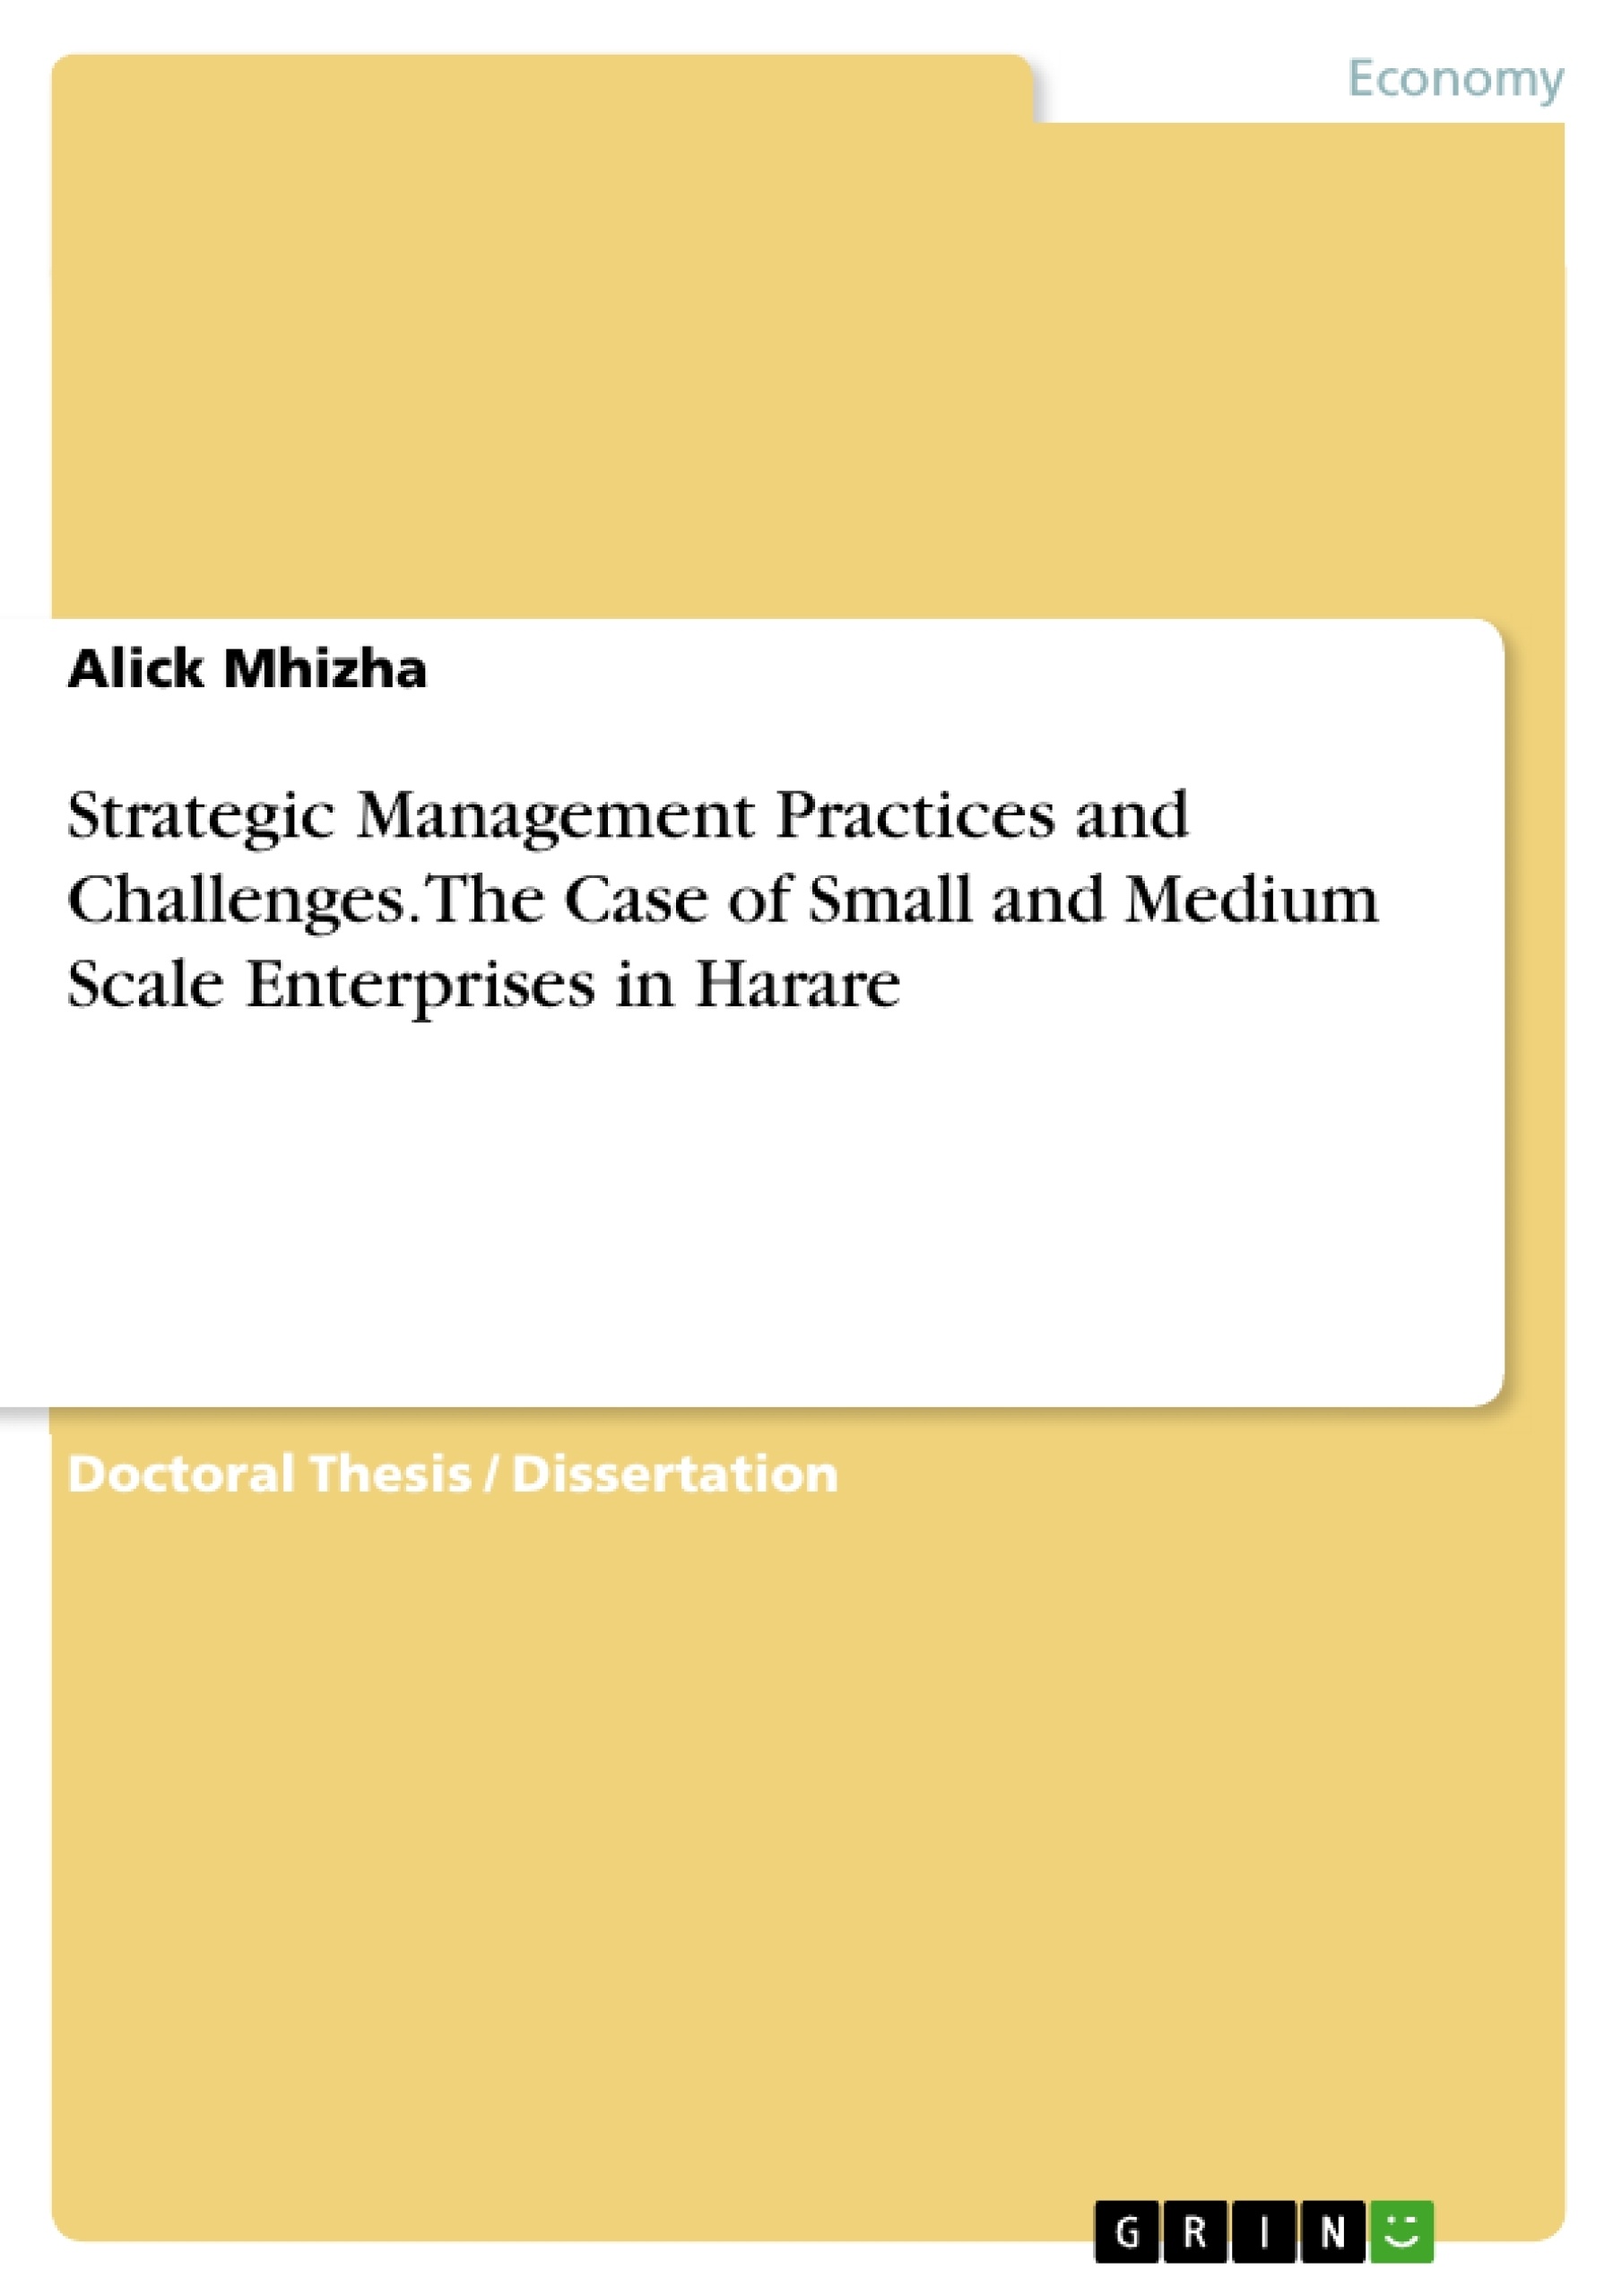 Title: Strategic Management Practices and Challenges. The Case of Small and Medium Scale Enterprises in Harare